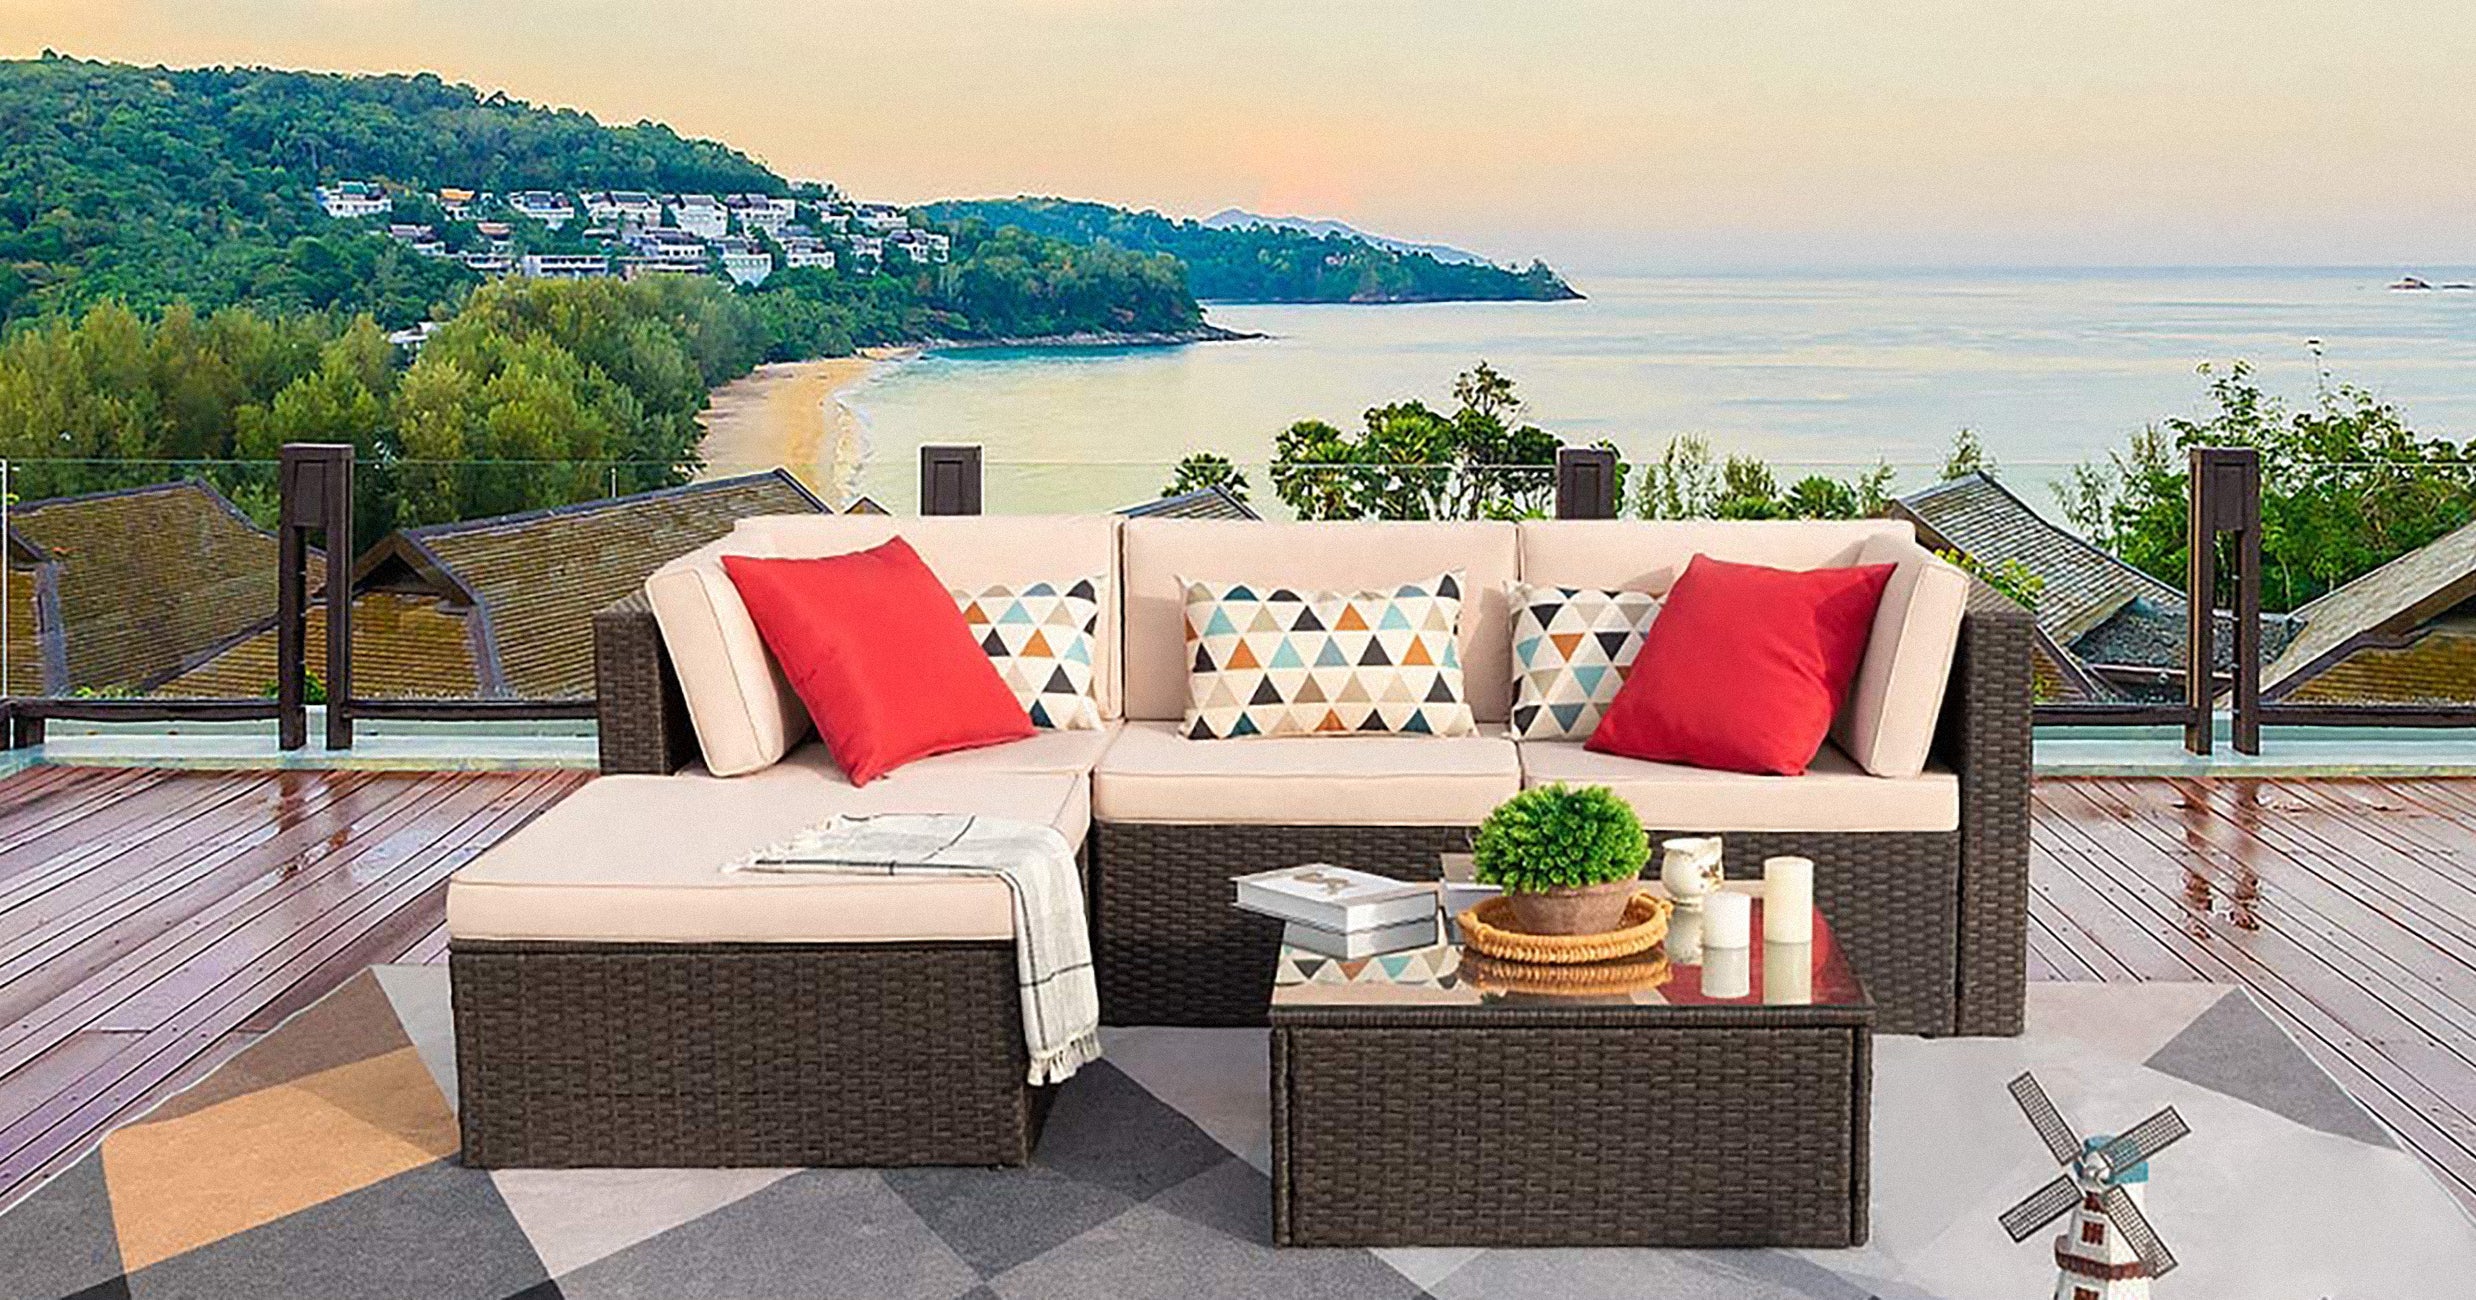 Amazon Prime Day Outdoor Furniture Deals 22